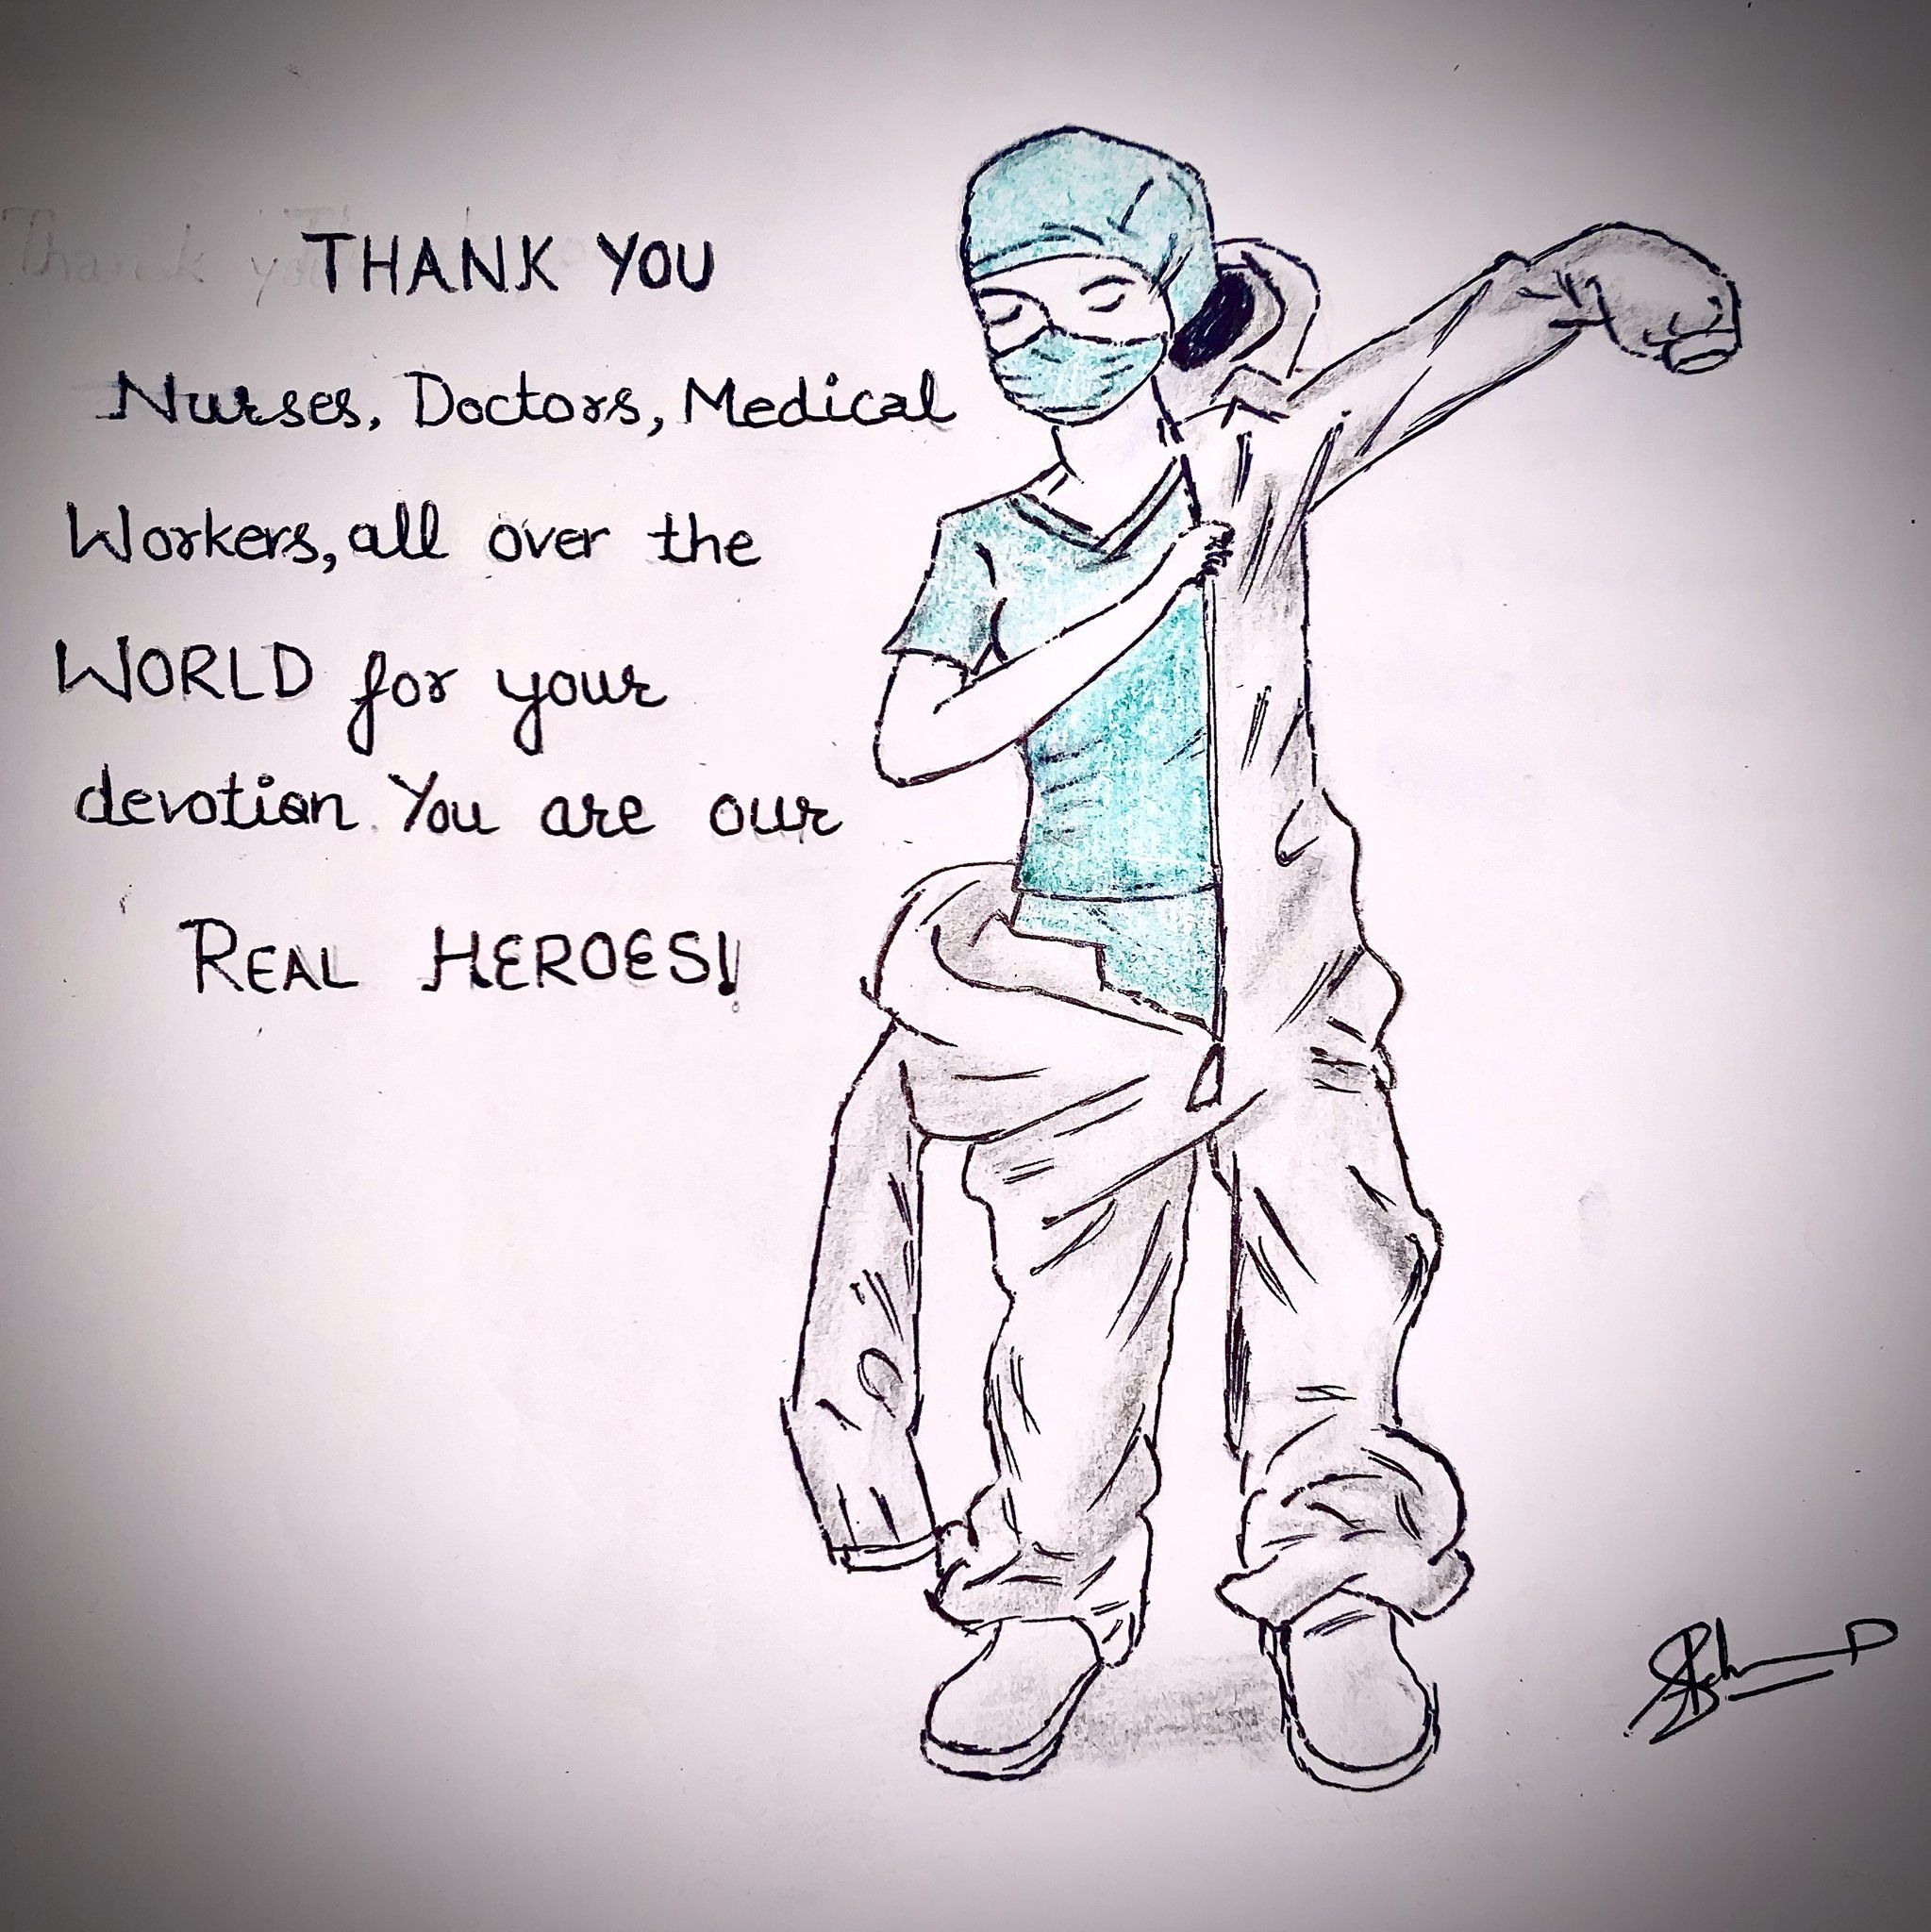 Sushma Verma On Twitter I Urge All Of You To Draw And Upload A Picture To Thank All The Doctors Nurses Medical Workers And All Others Who Are On The Front Lines In